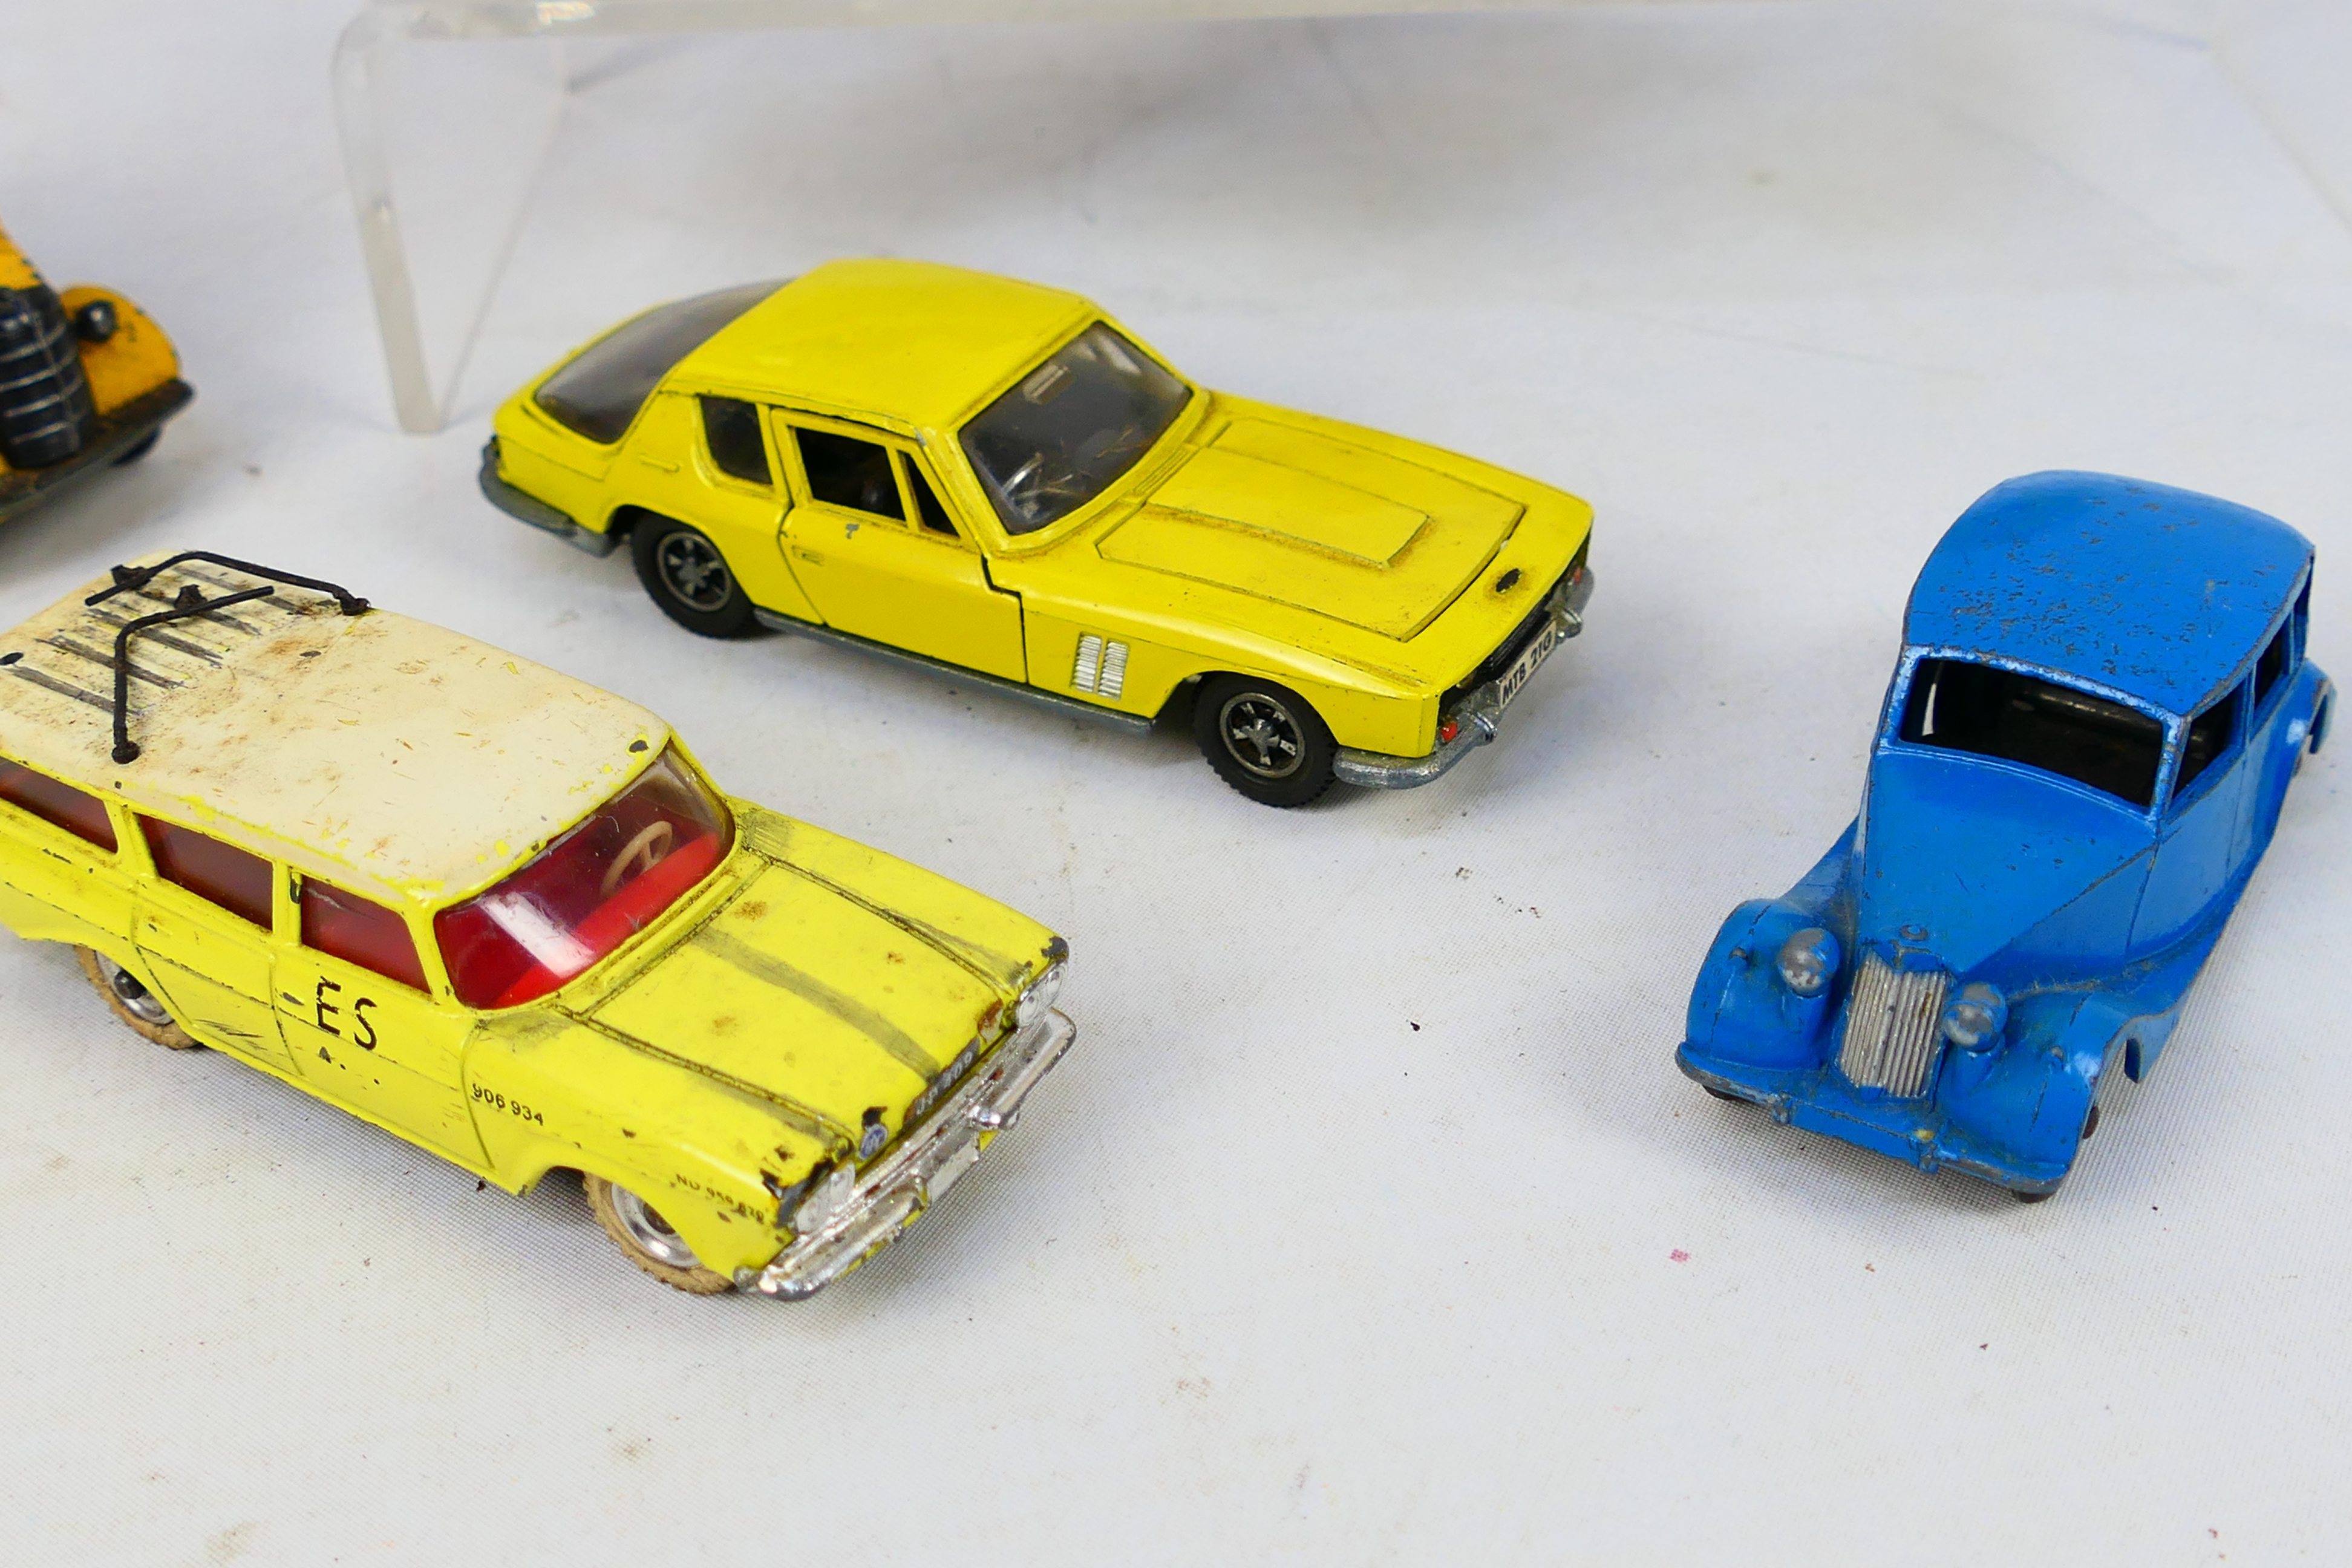 Dinky Toys - An unboxed collection of 10 Dinky Toys diecast model vehicles. - Image 5 of 7